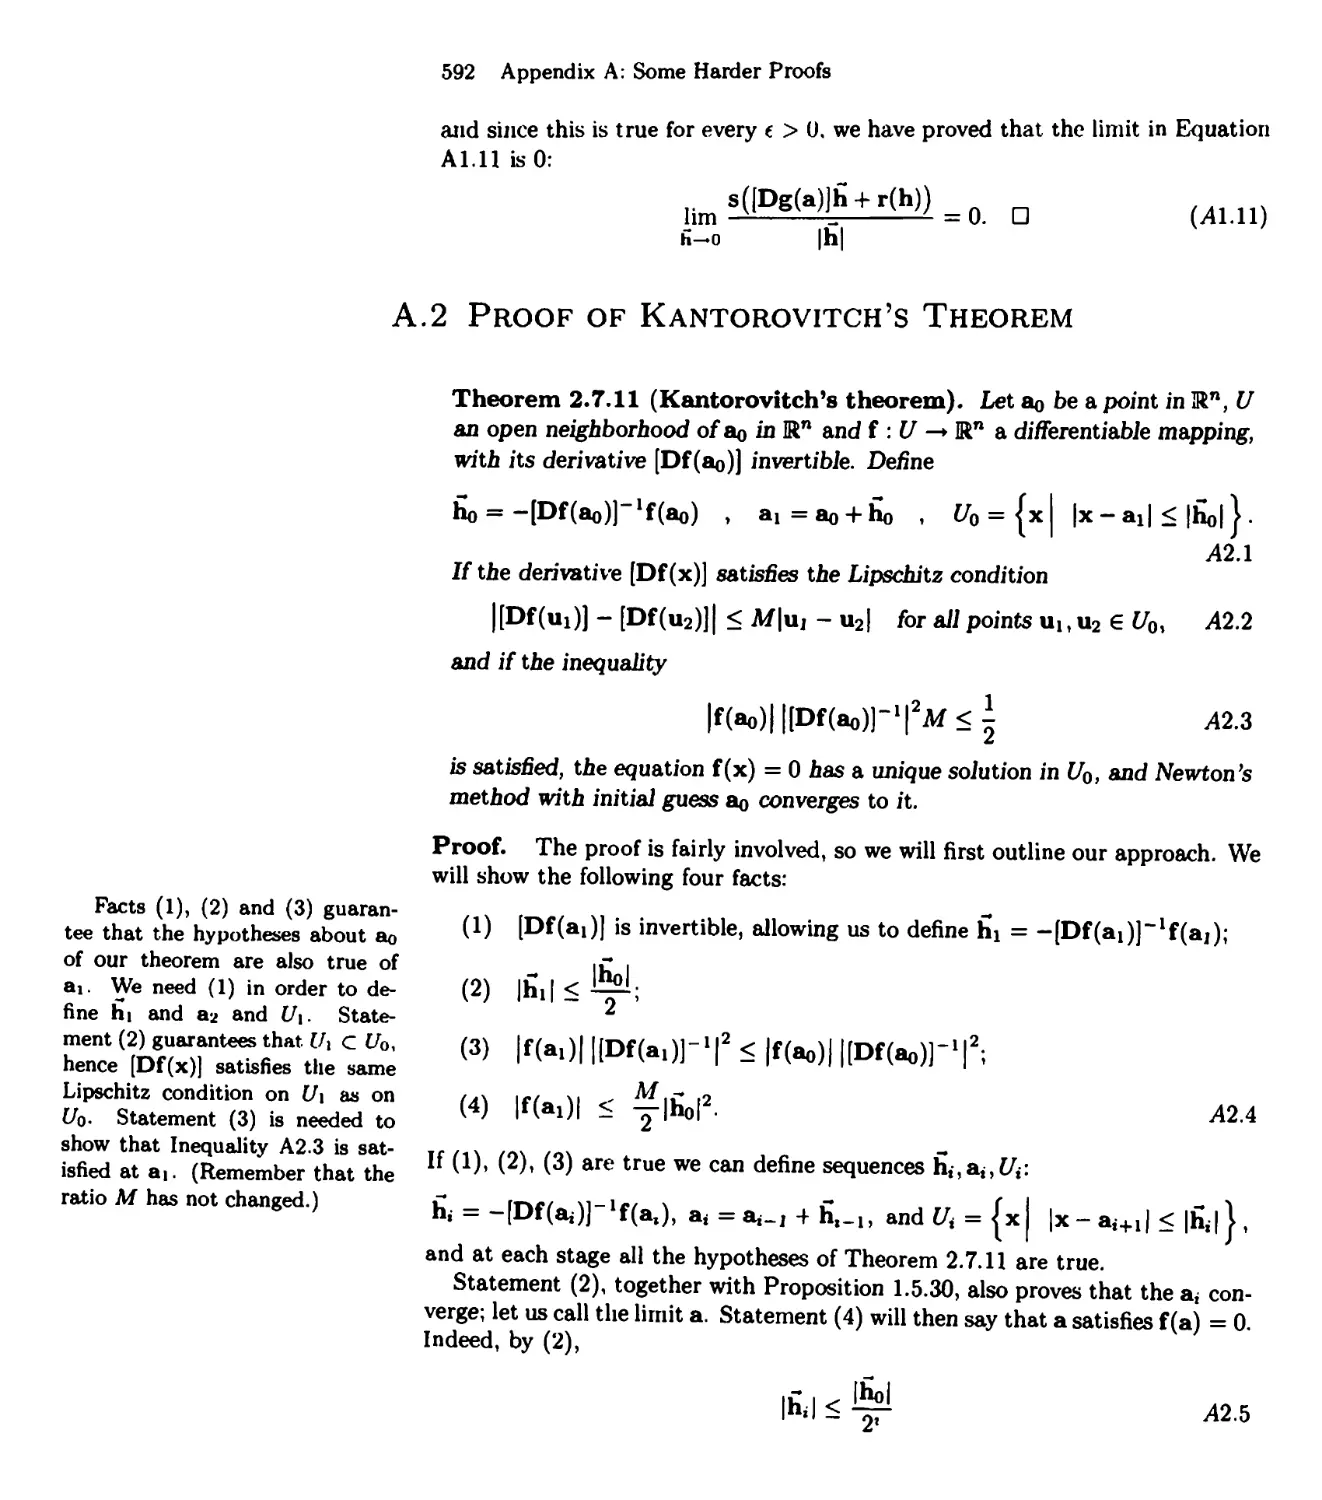 A.2 Proof of Kantorovitch's theorem